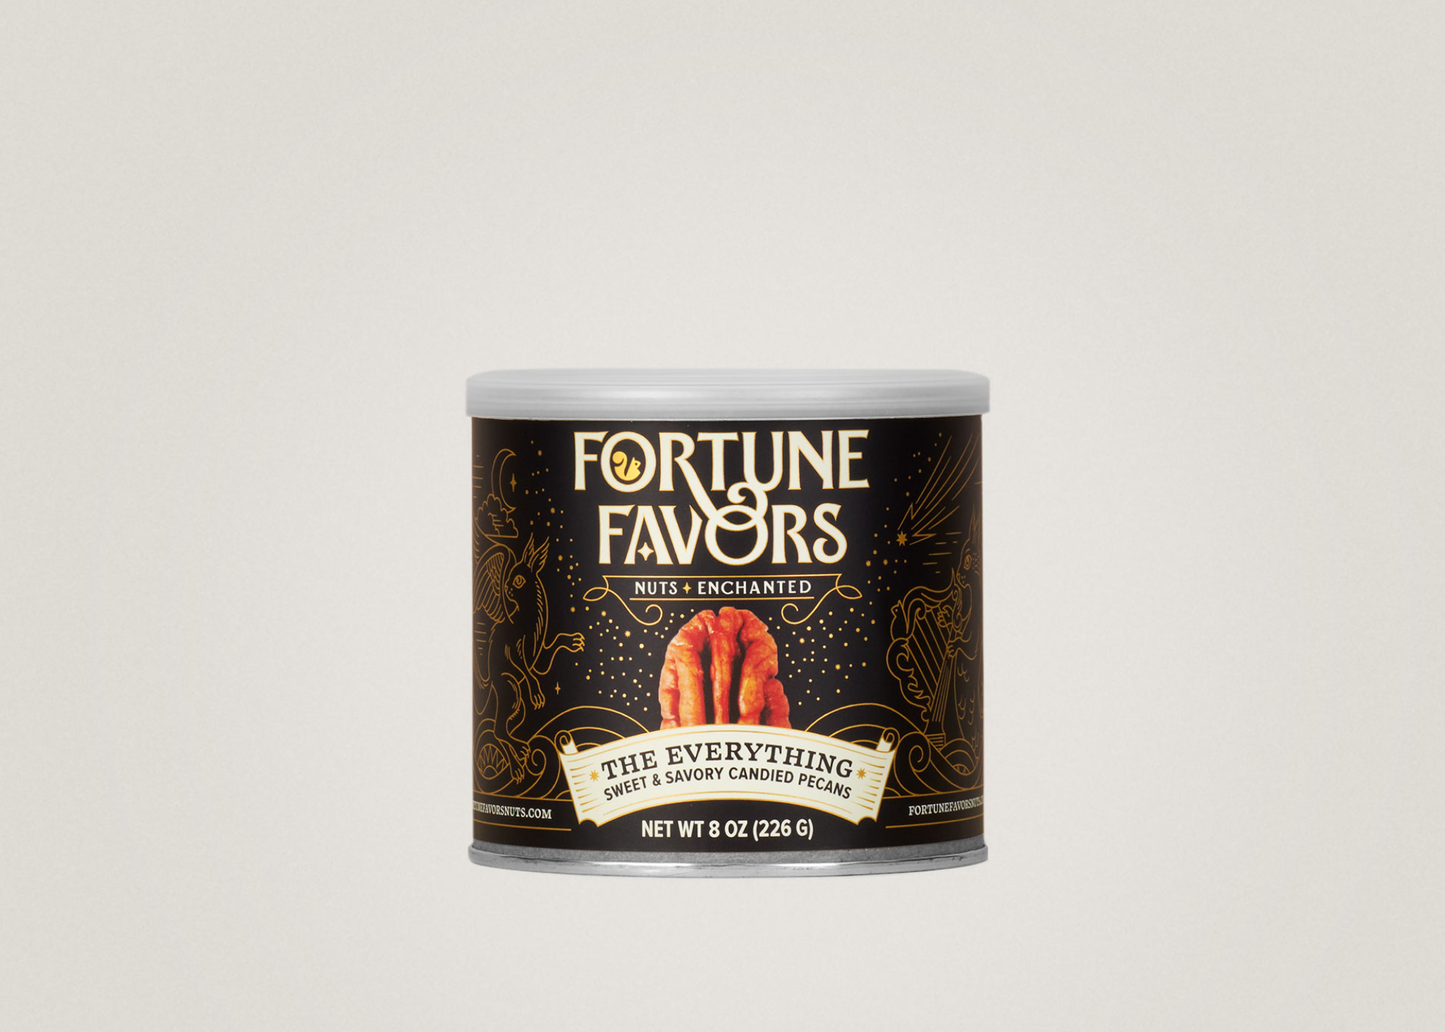 The Everything Candied Pecans from Fortune Favors